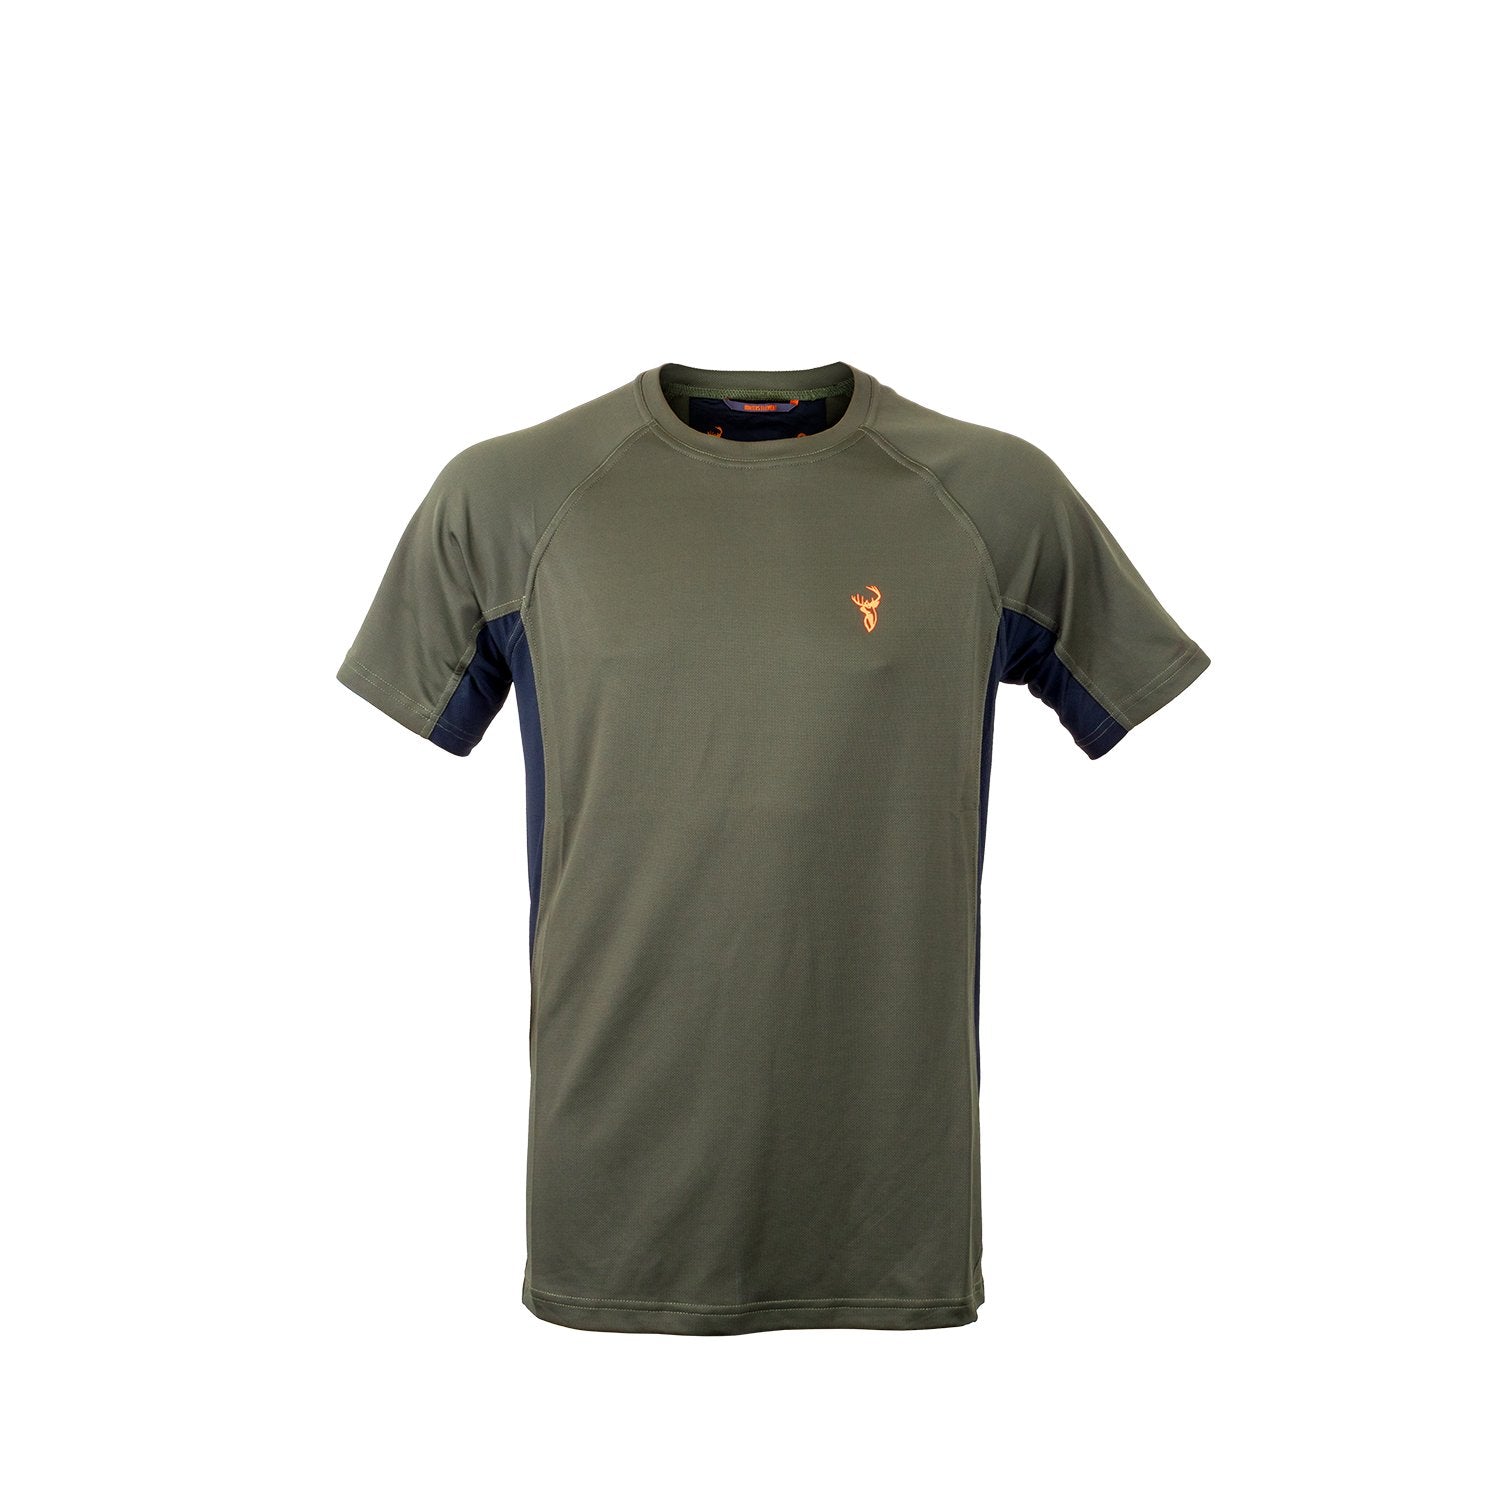 Hunters Element Eclipse Tee - Forest Green - L / FOREST GREEN - Mansfield Hunting & Fishing - Products to prepare for Corona Virus